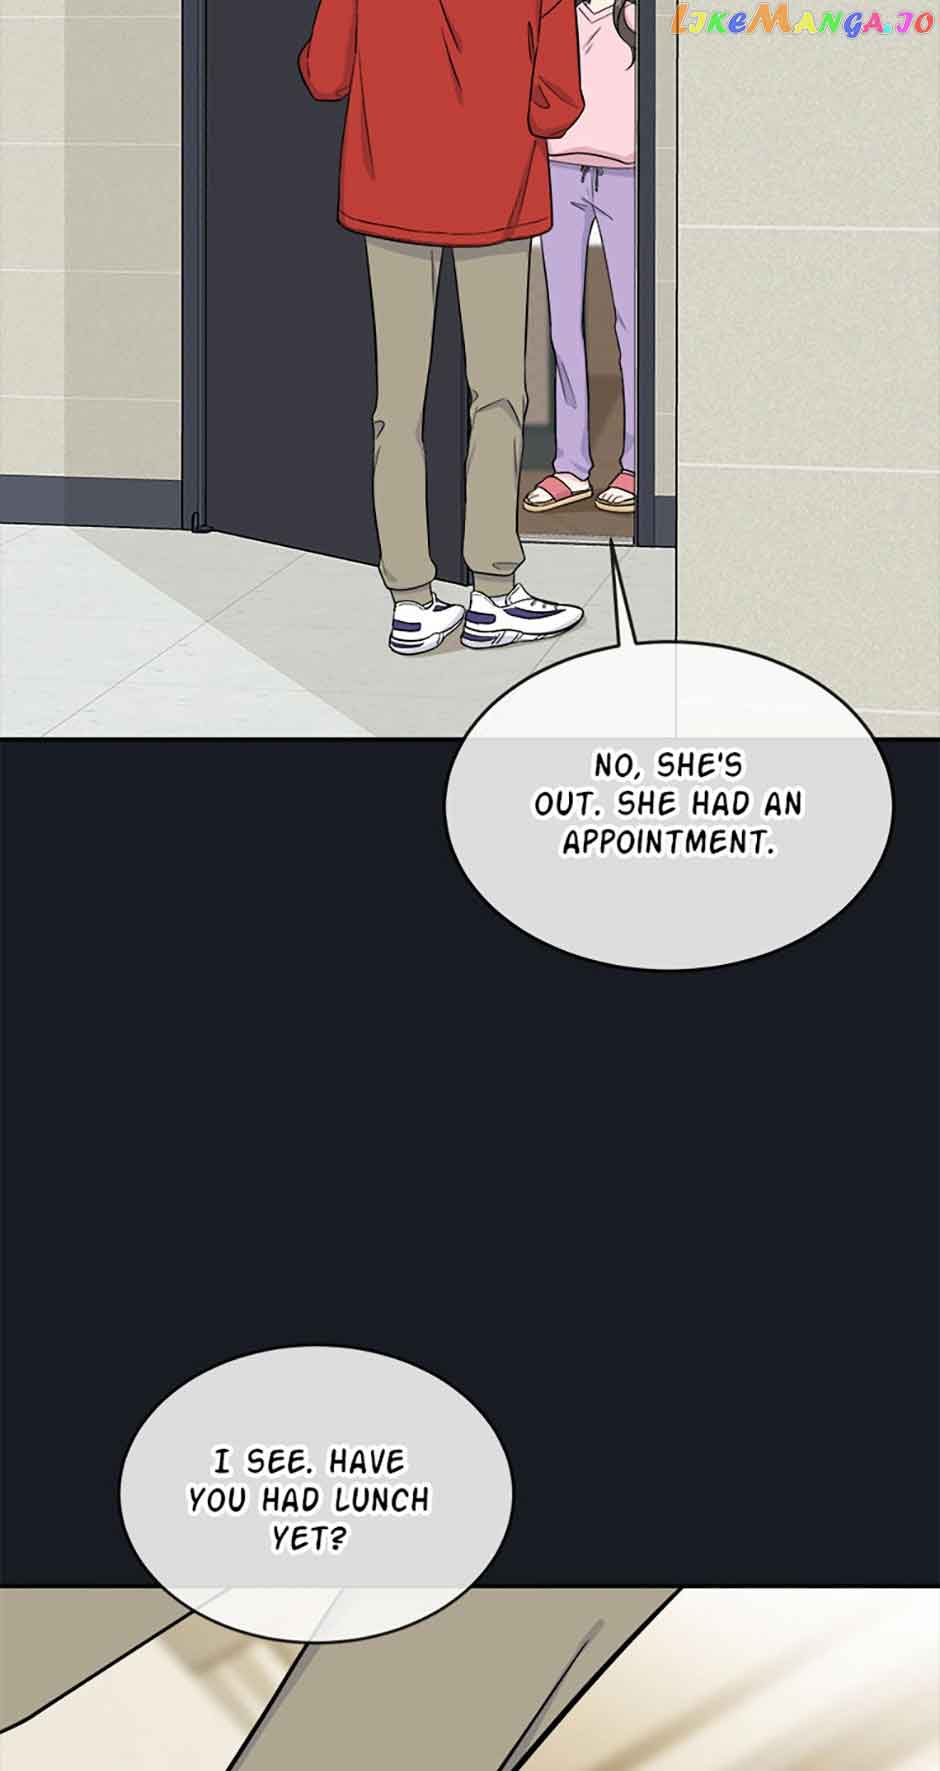 Don't Tempt Me, Oppa - Page 4